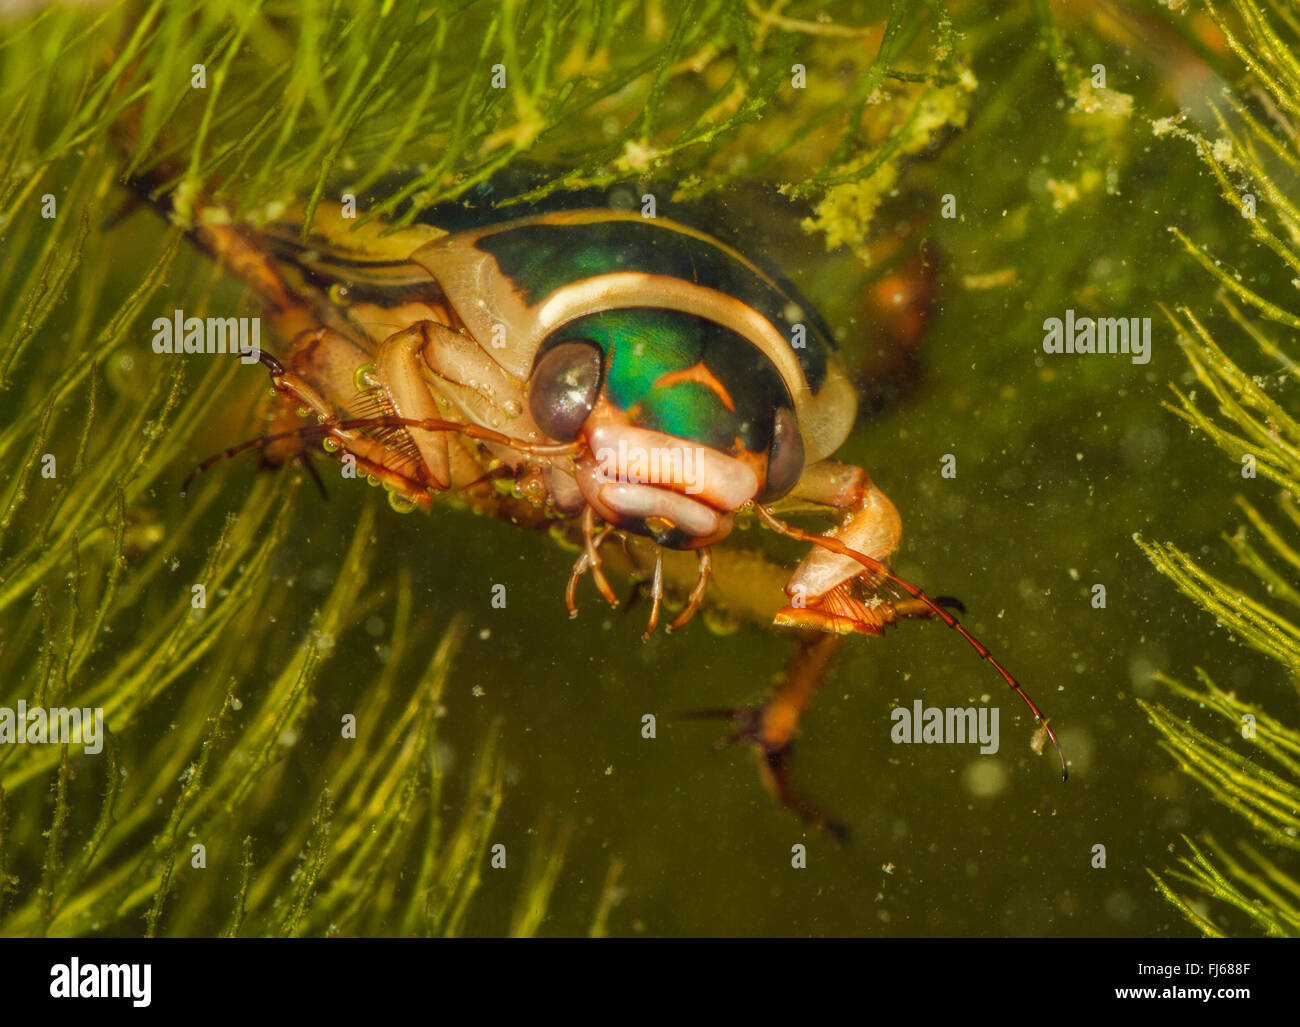 Great diving beetle (Dytiscus marginalis), male, Germany Stock Photo